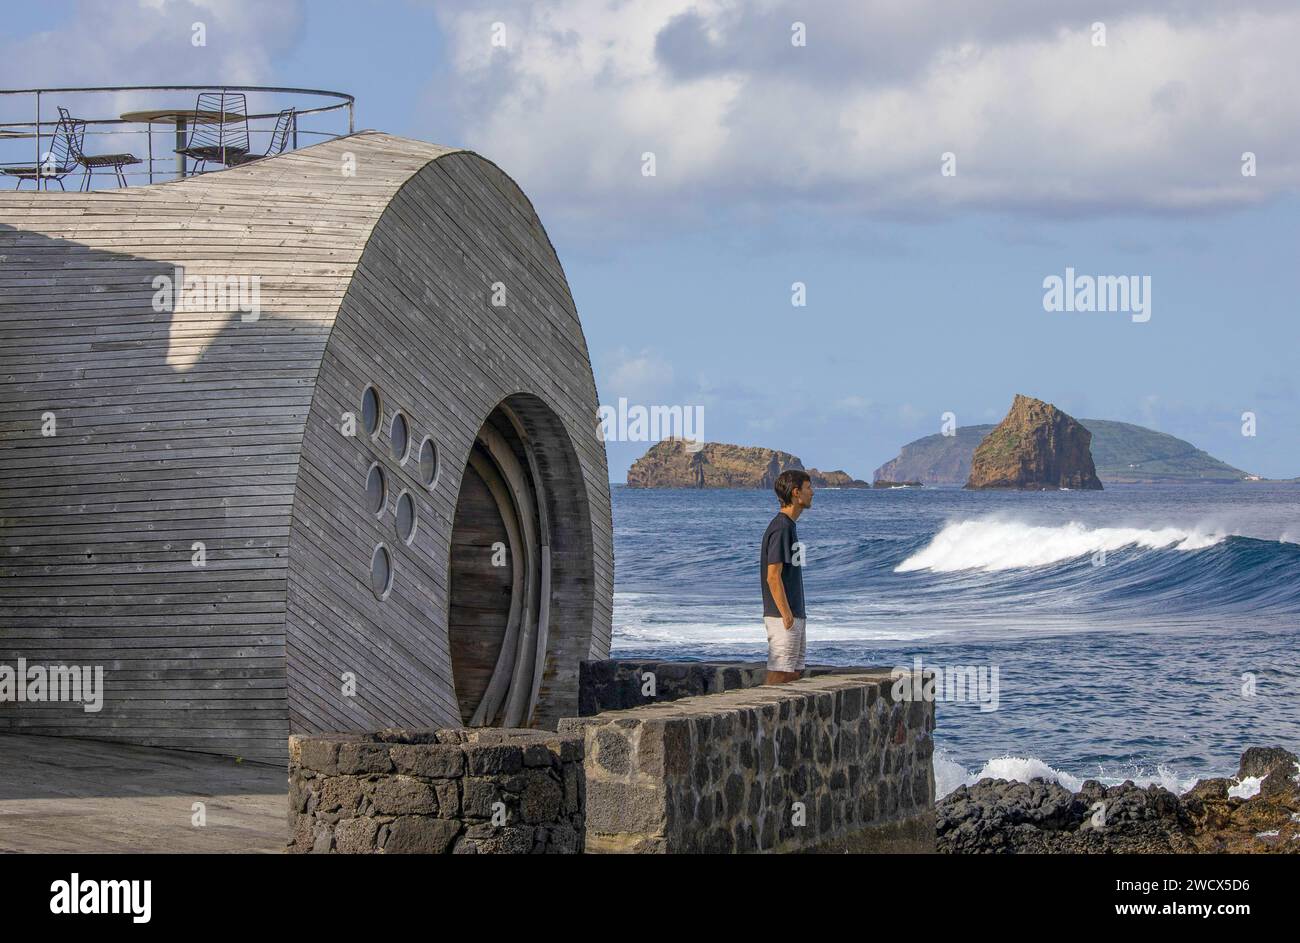 Portugal, Azores archipelago, Pico island, Madalena, man in front of the entrance to the cella bar, a sort of designer wooden bubble facing the ocean and the island of Faial Stock Photo